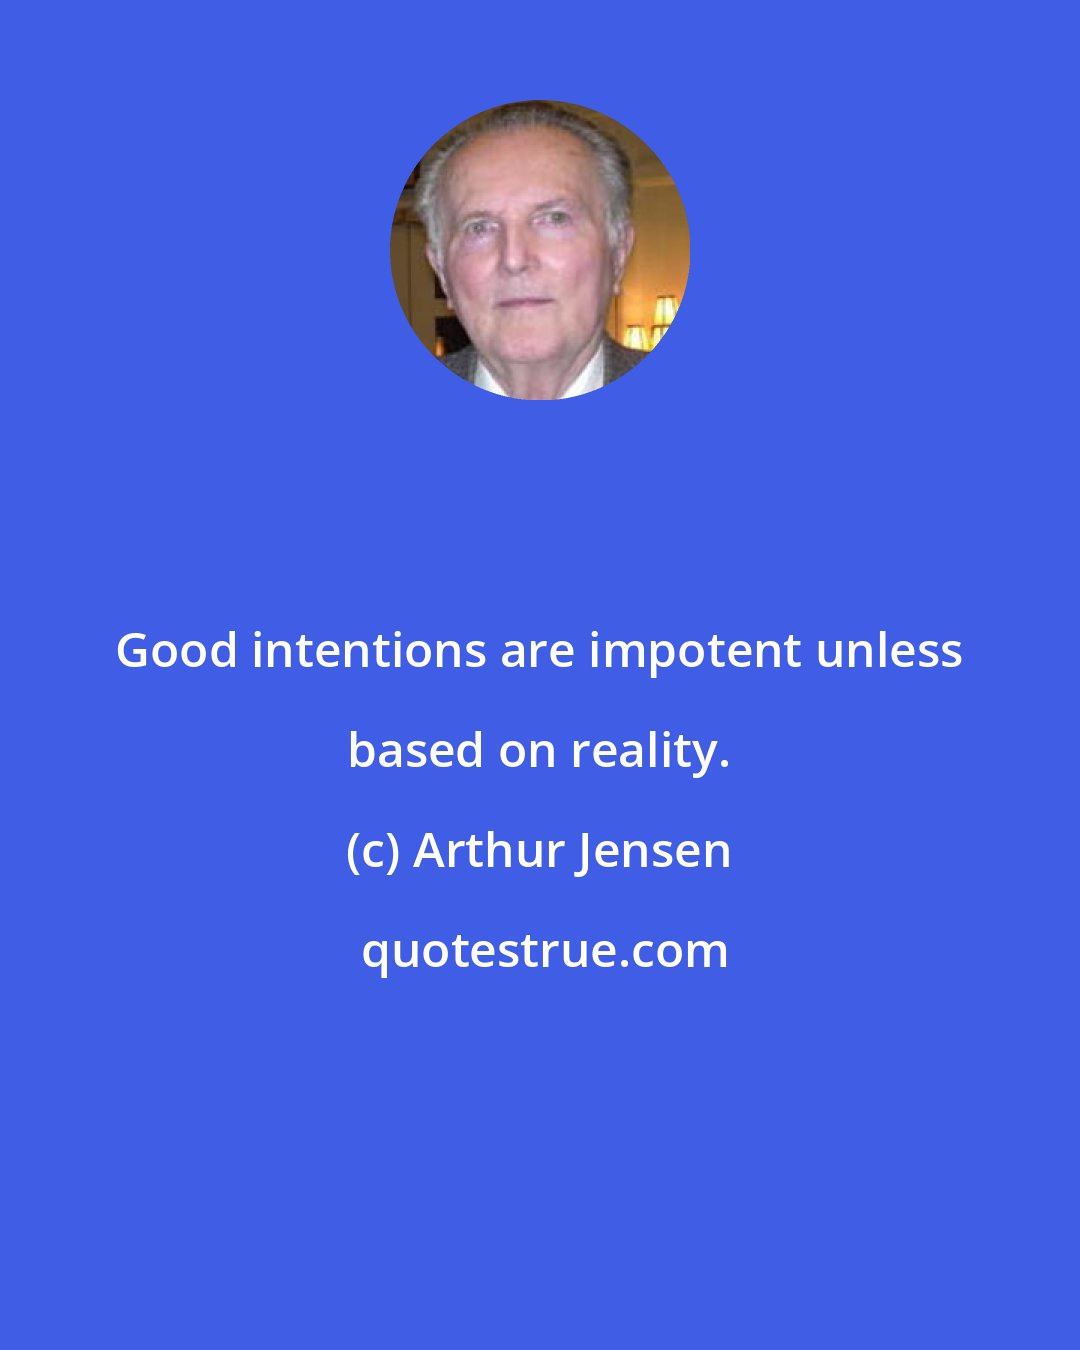 Arthur Jensen: Good intentions are impotent unless based on reality.